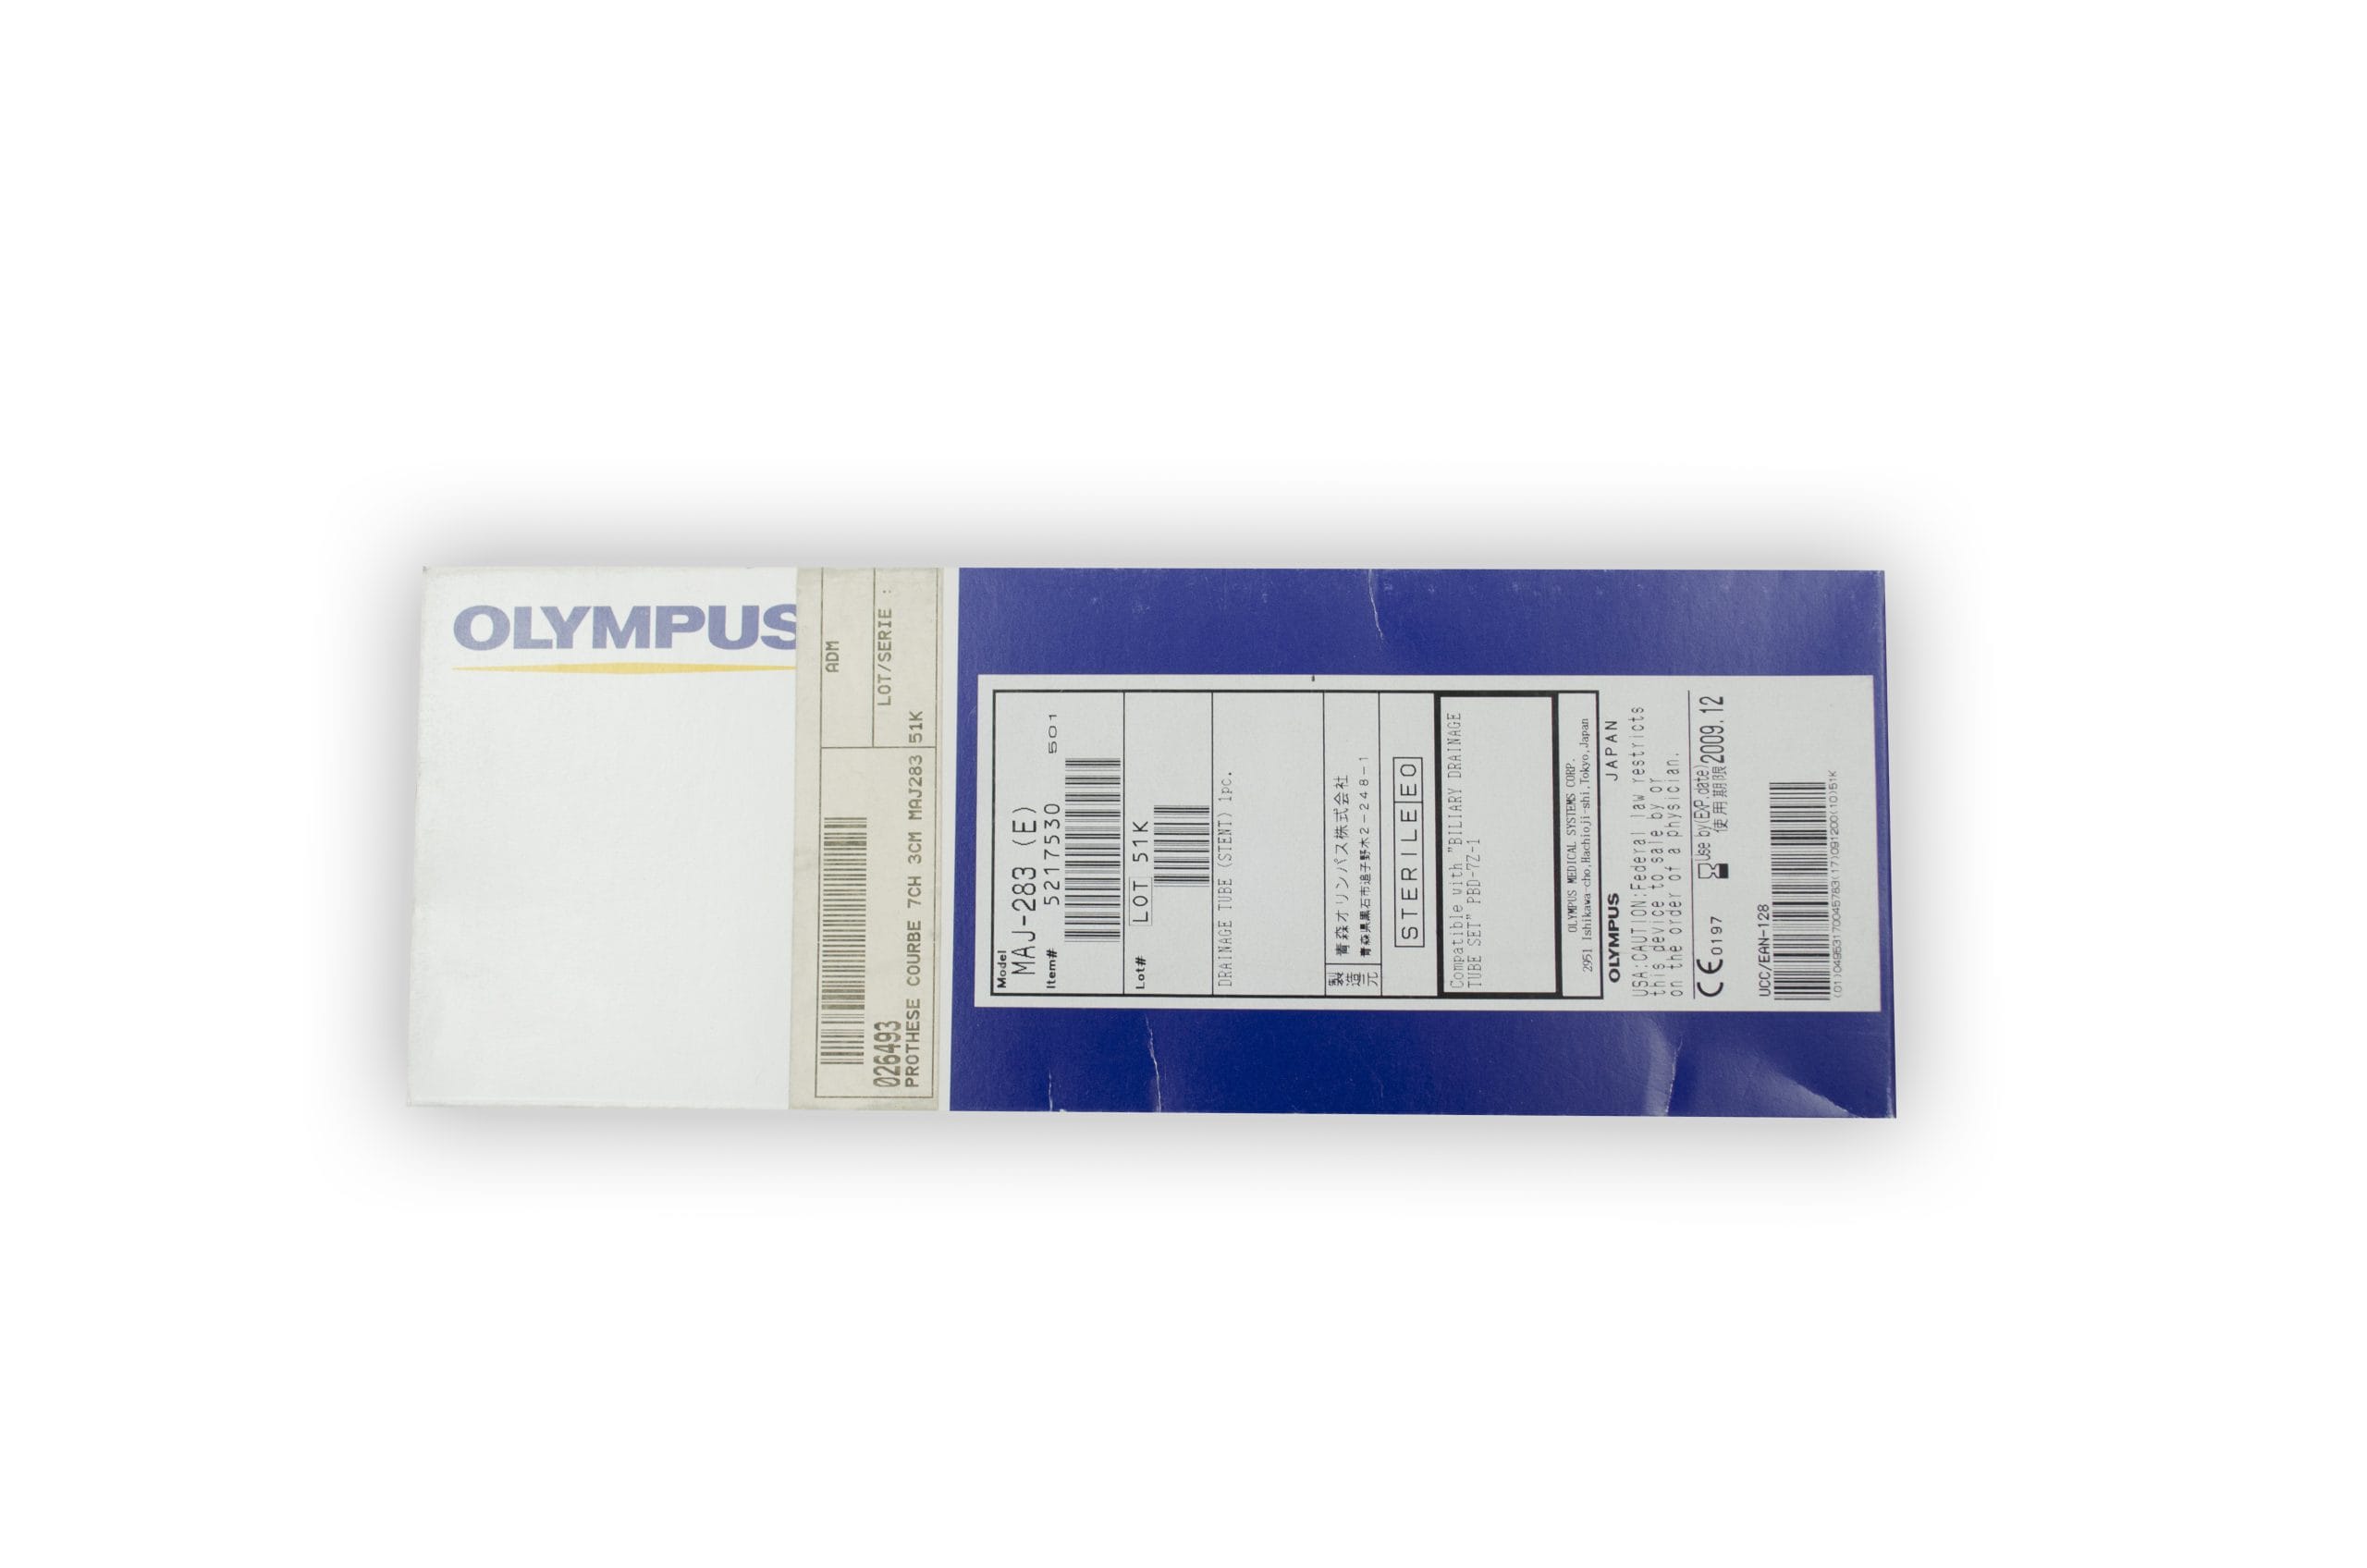 [Out-of-Date] Olympus Disposable Accessory - MAJ-283